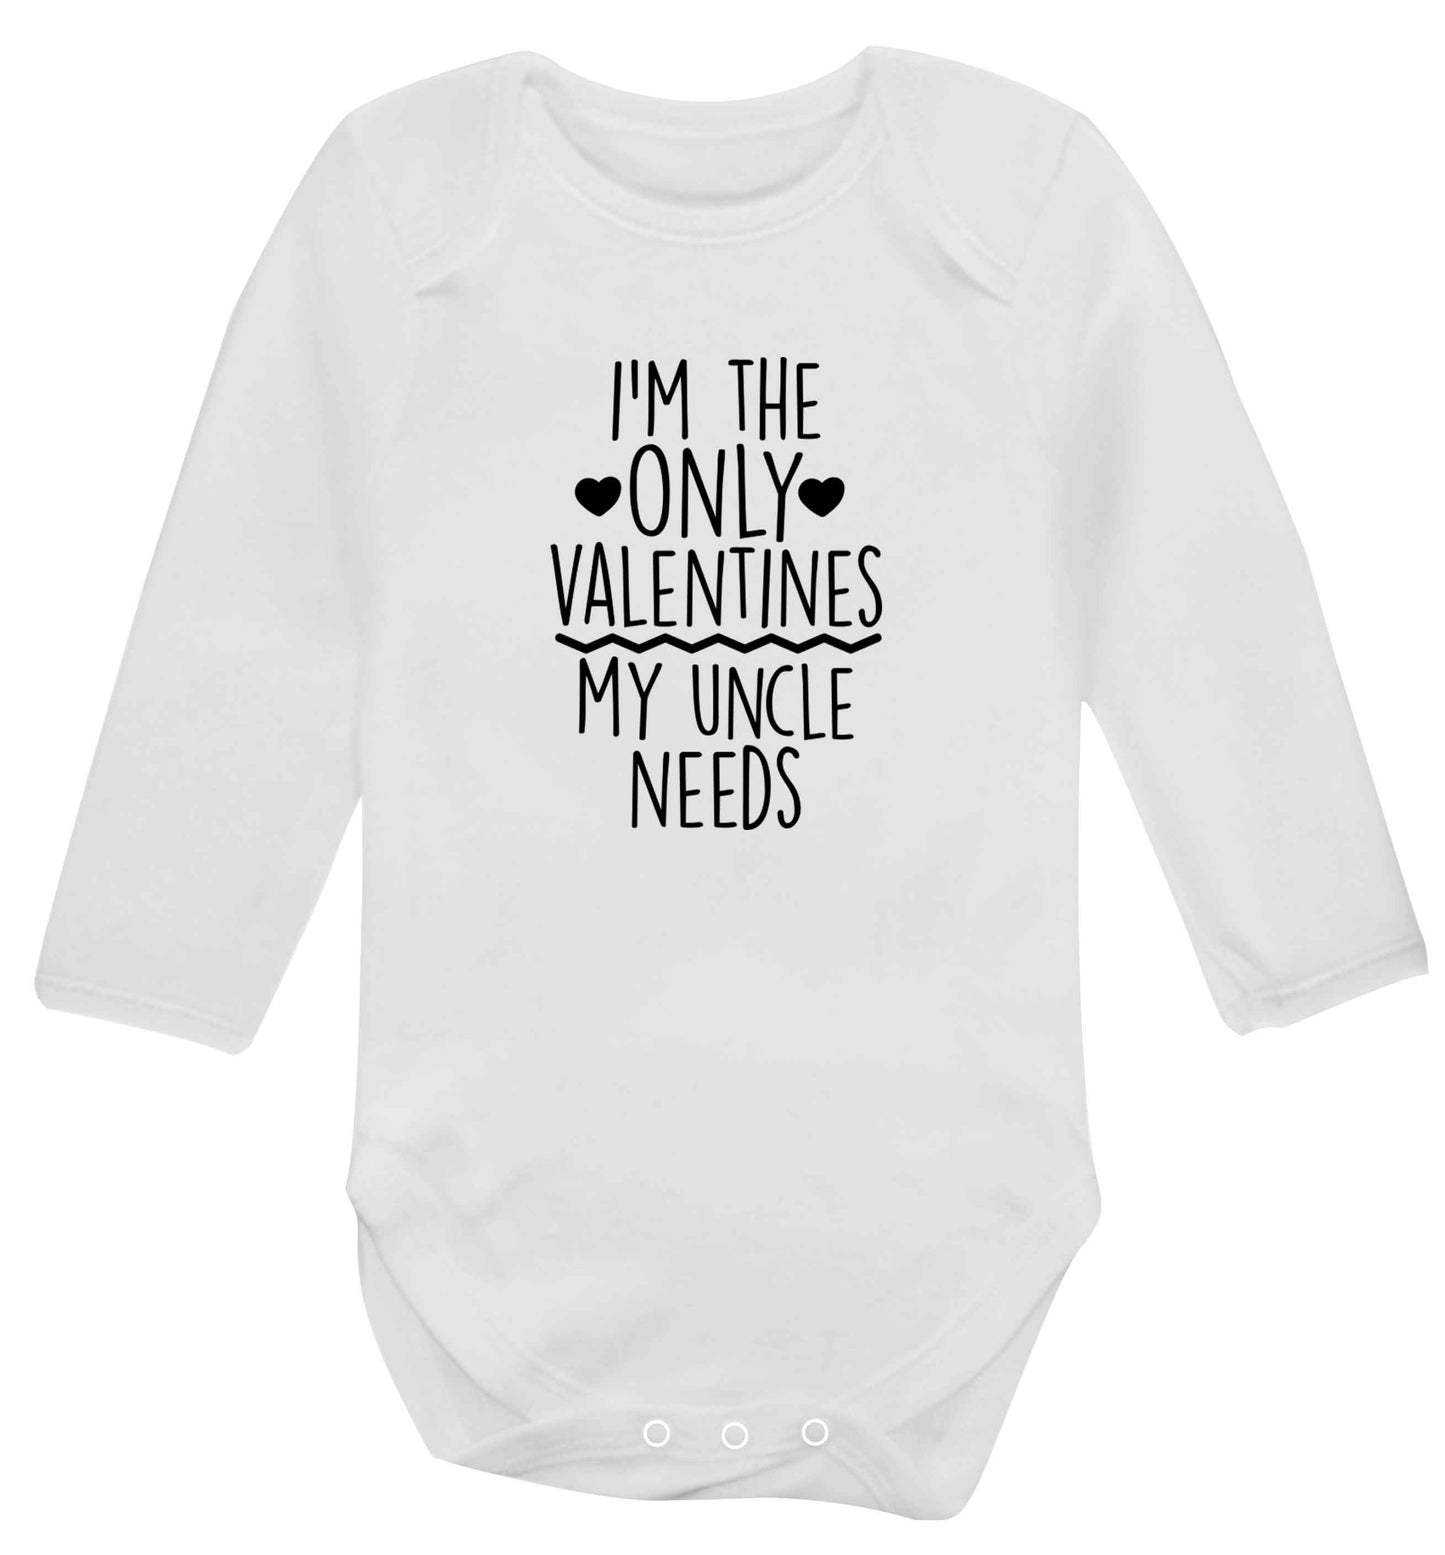 I'm the only valentines my uncle needs baby vest long sleeved white 6-12 months